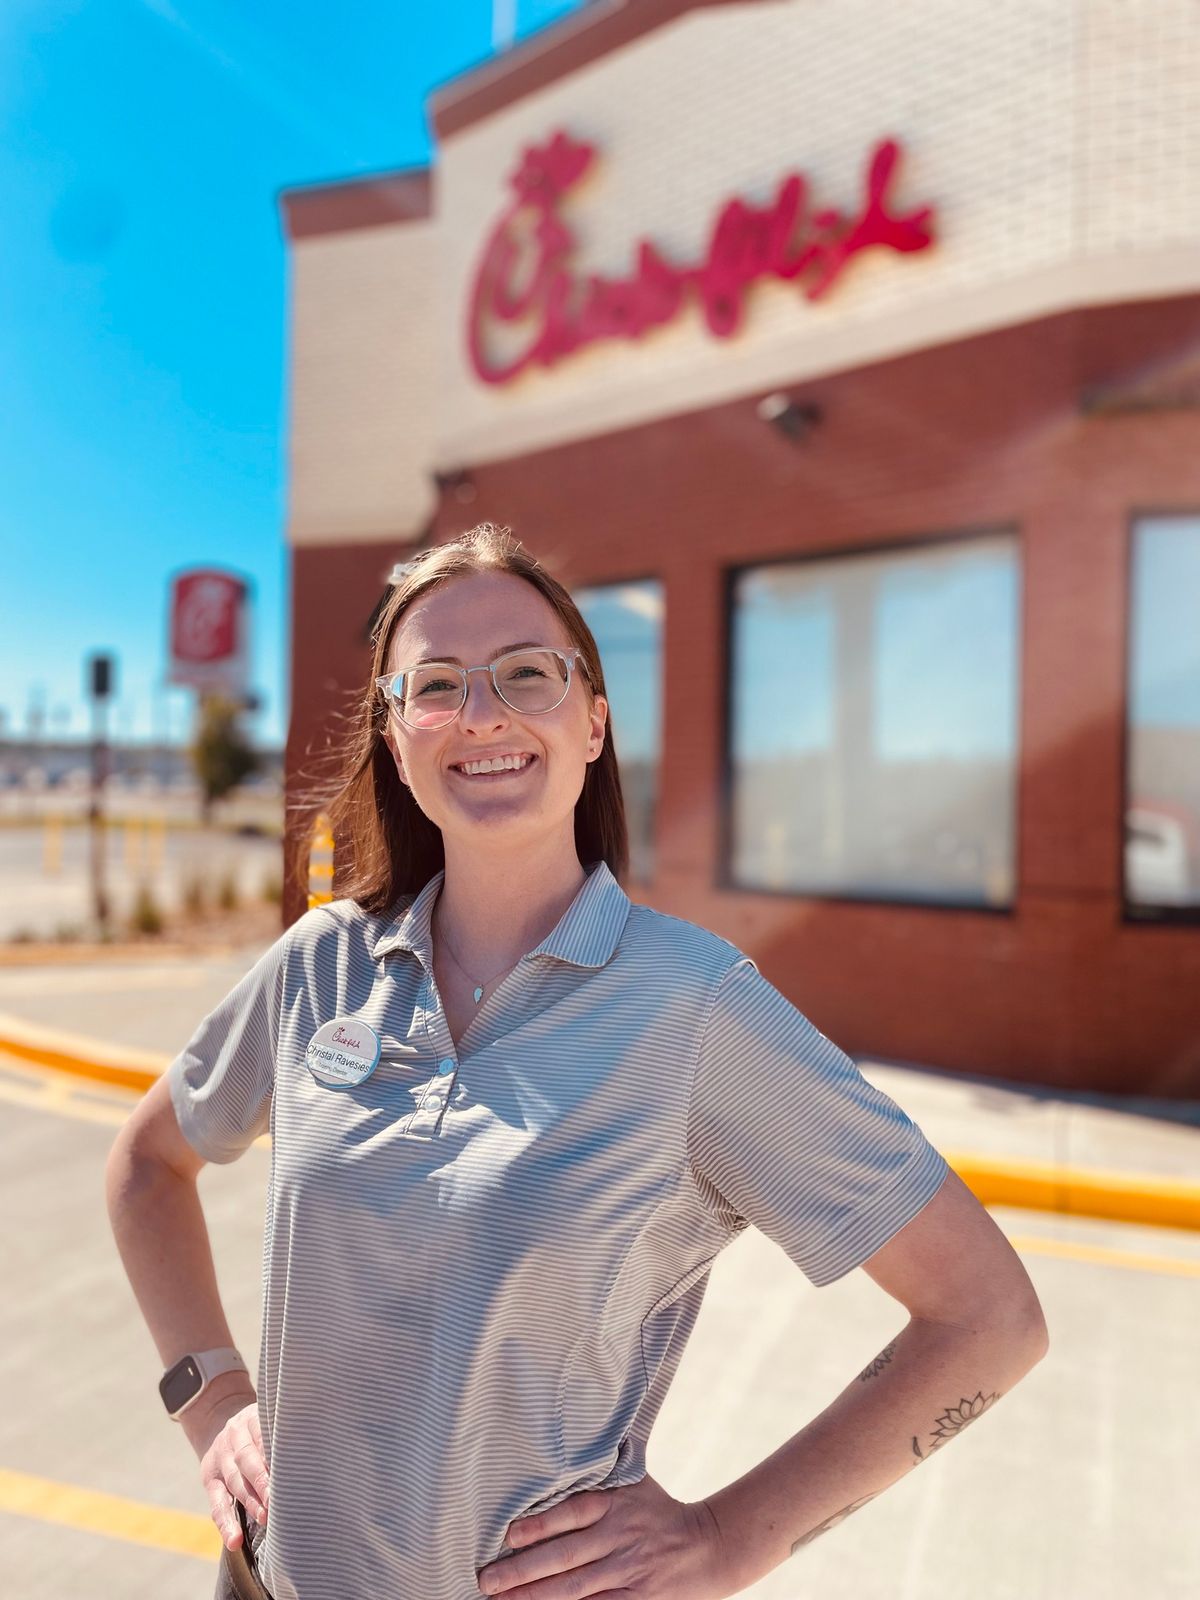 JOIN OUR TEAM! *** Open Interviews at Chick-fil-A Hattiesburg